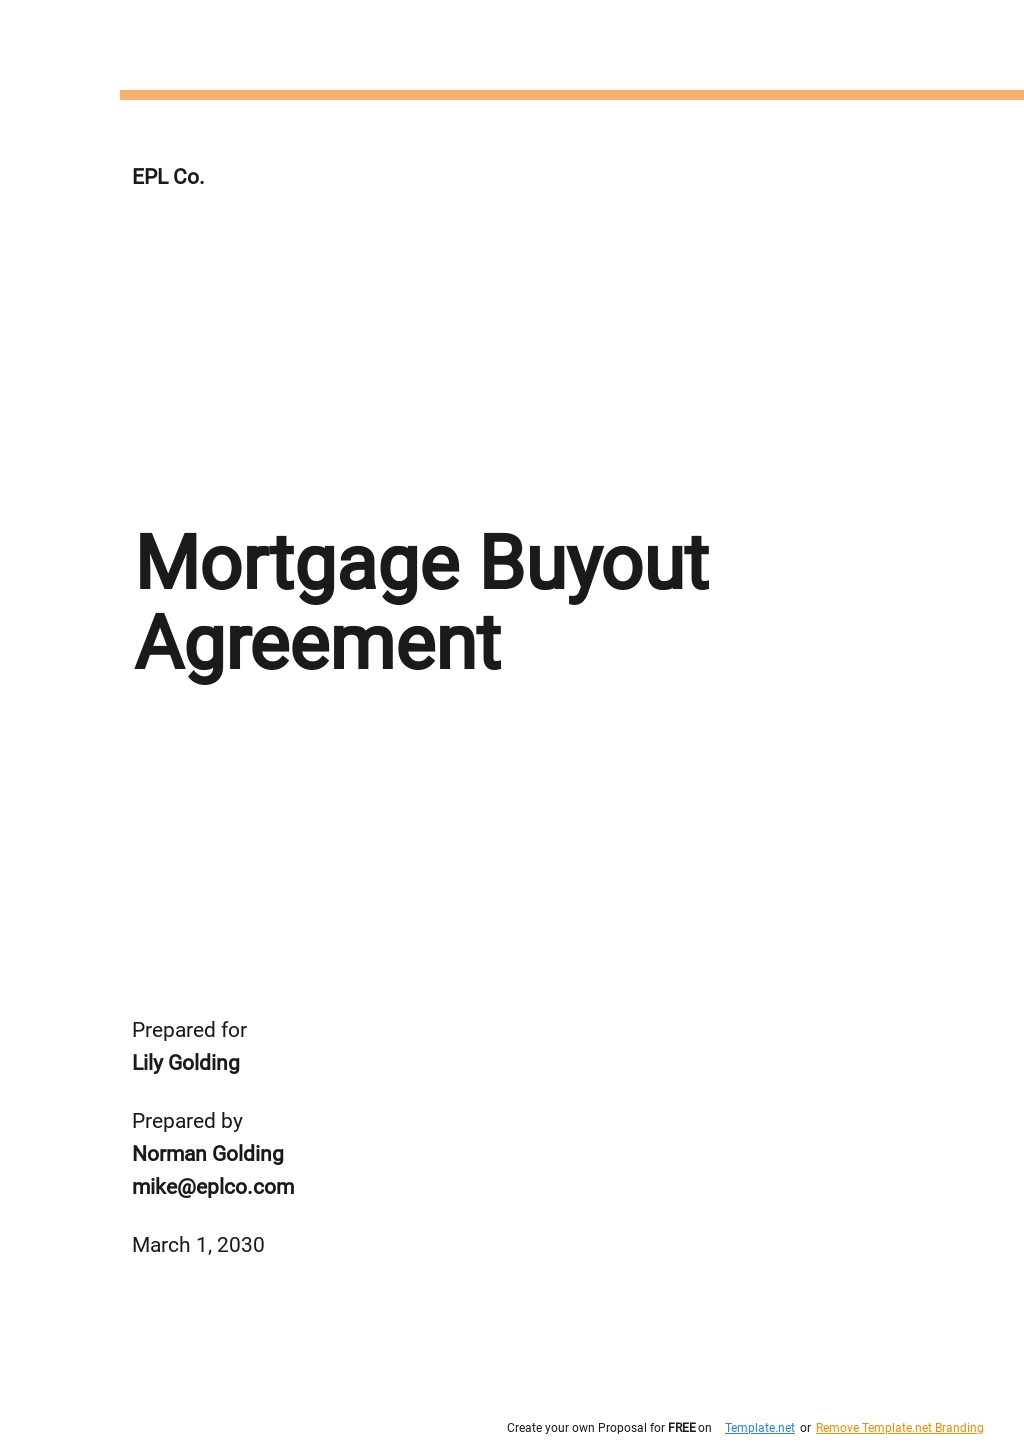 Mortgage Buyout Agreement Template.jpe